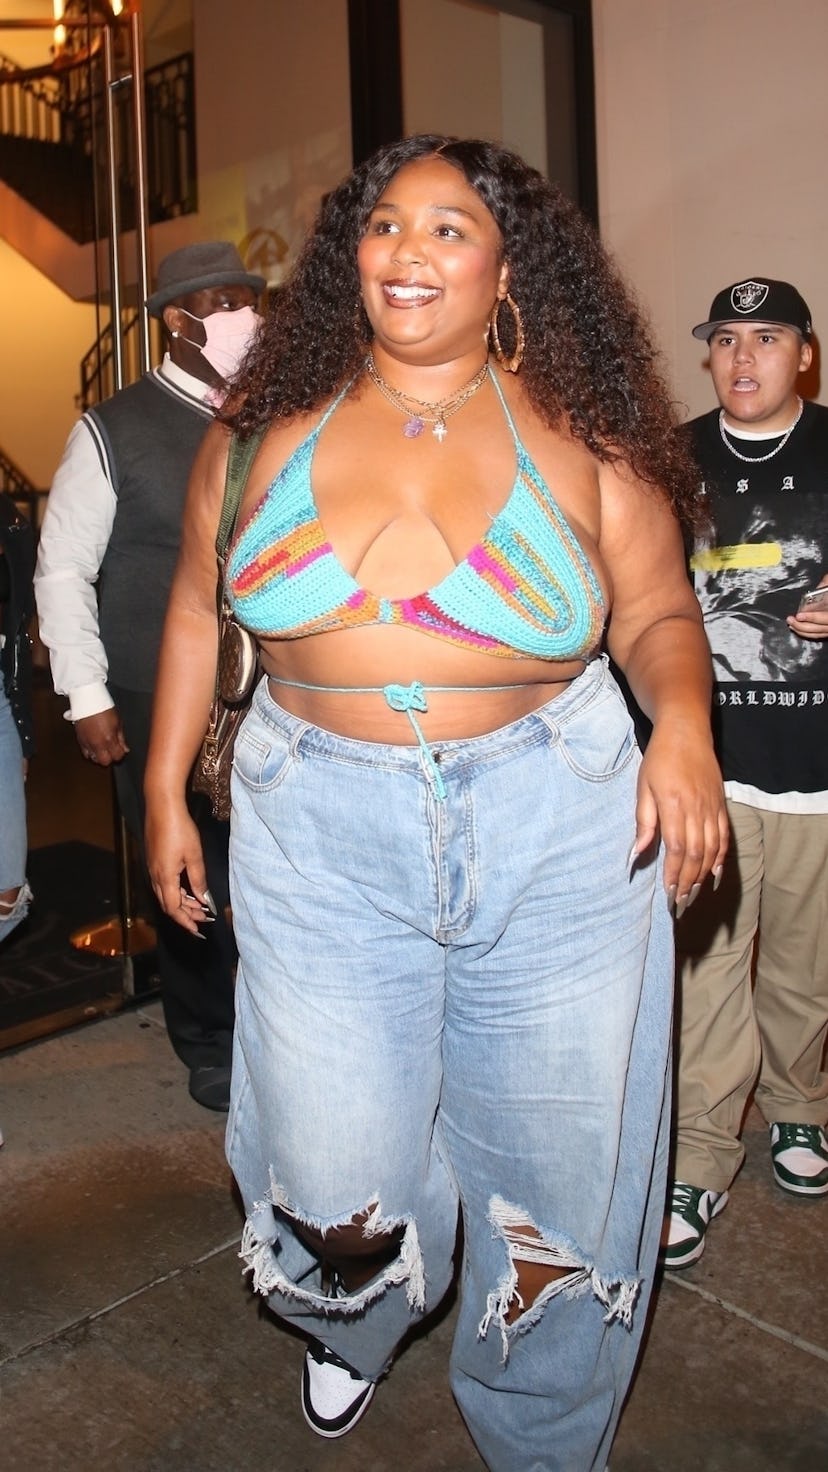 From Lizzo to Gigi Hadid, here are the best dressed celebrities of the week.